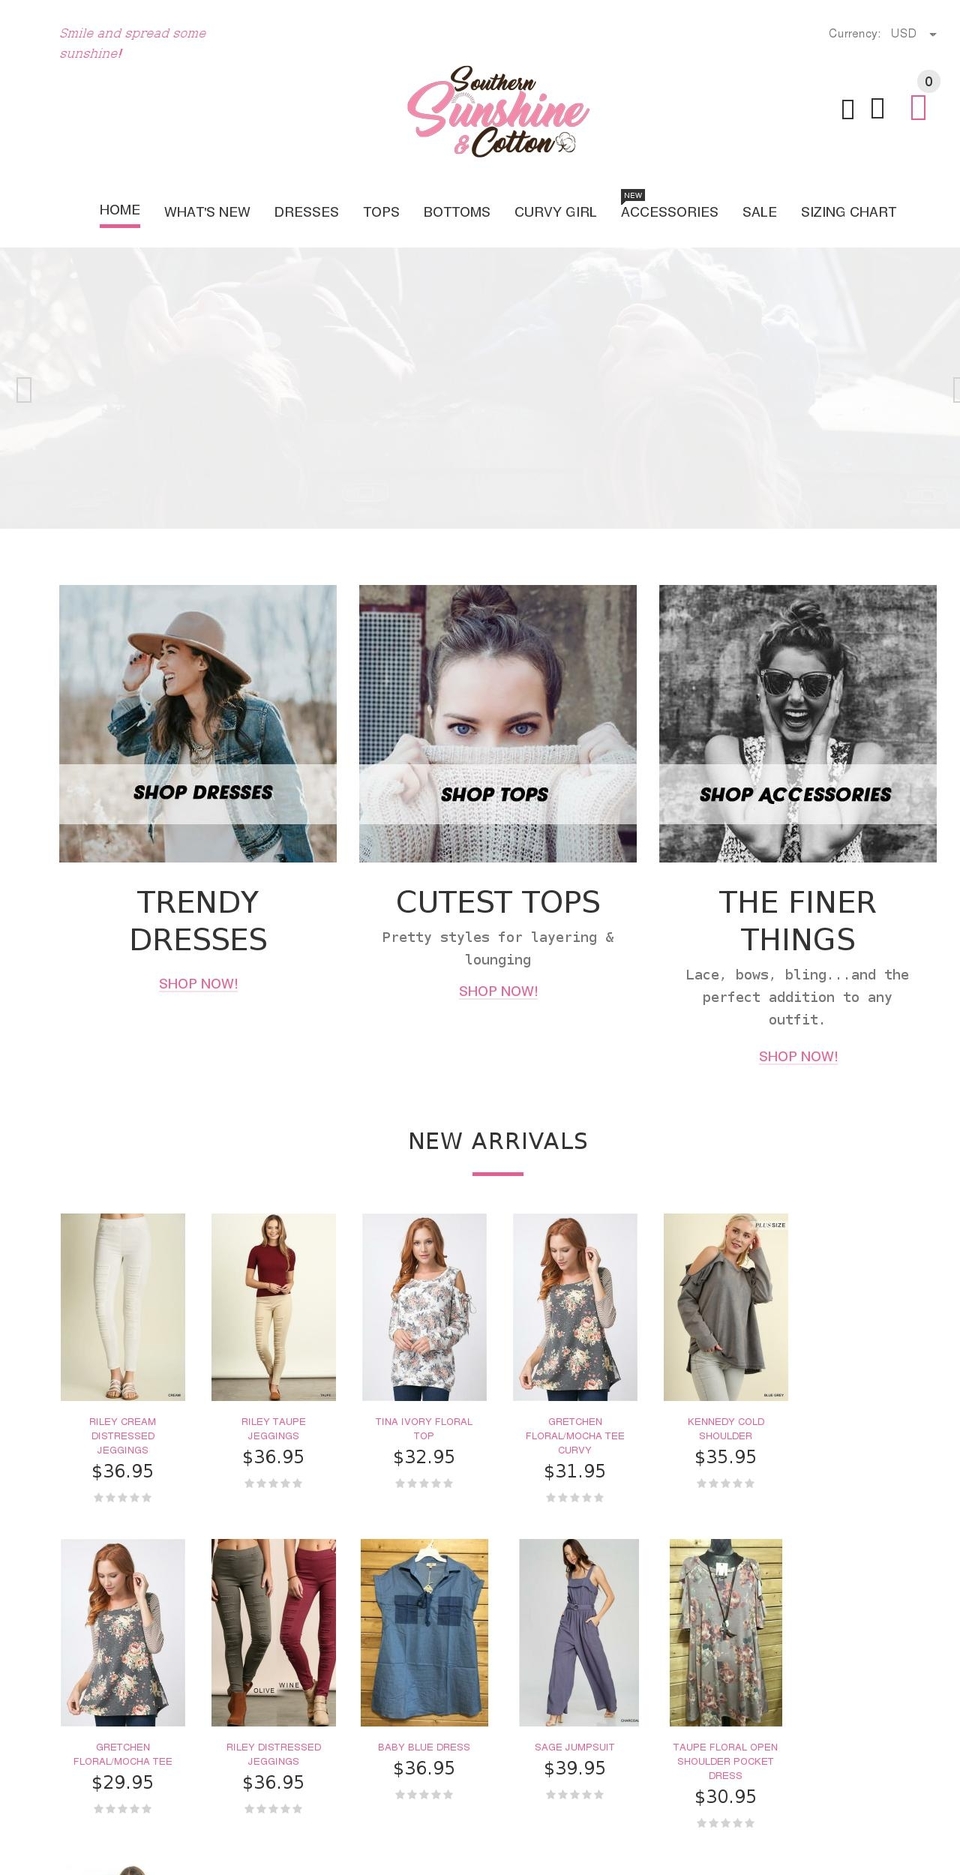 yourstore-v2-1-3 Shopify theme site example southernsunshineandcotton.com